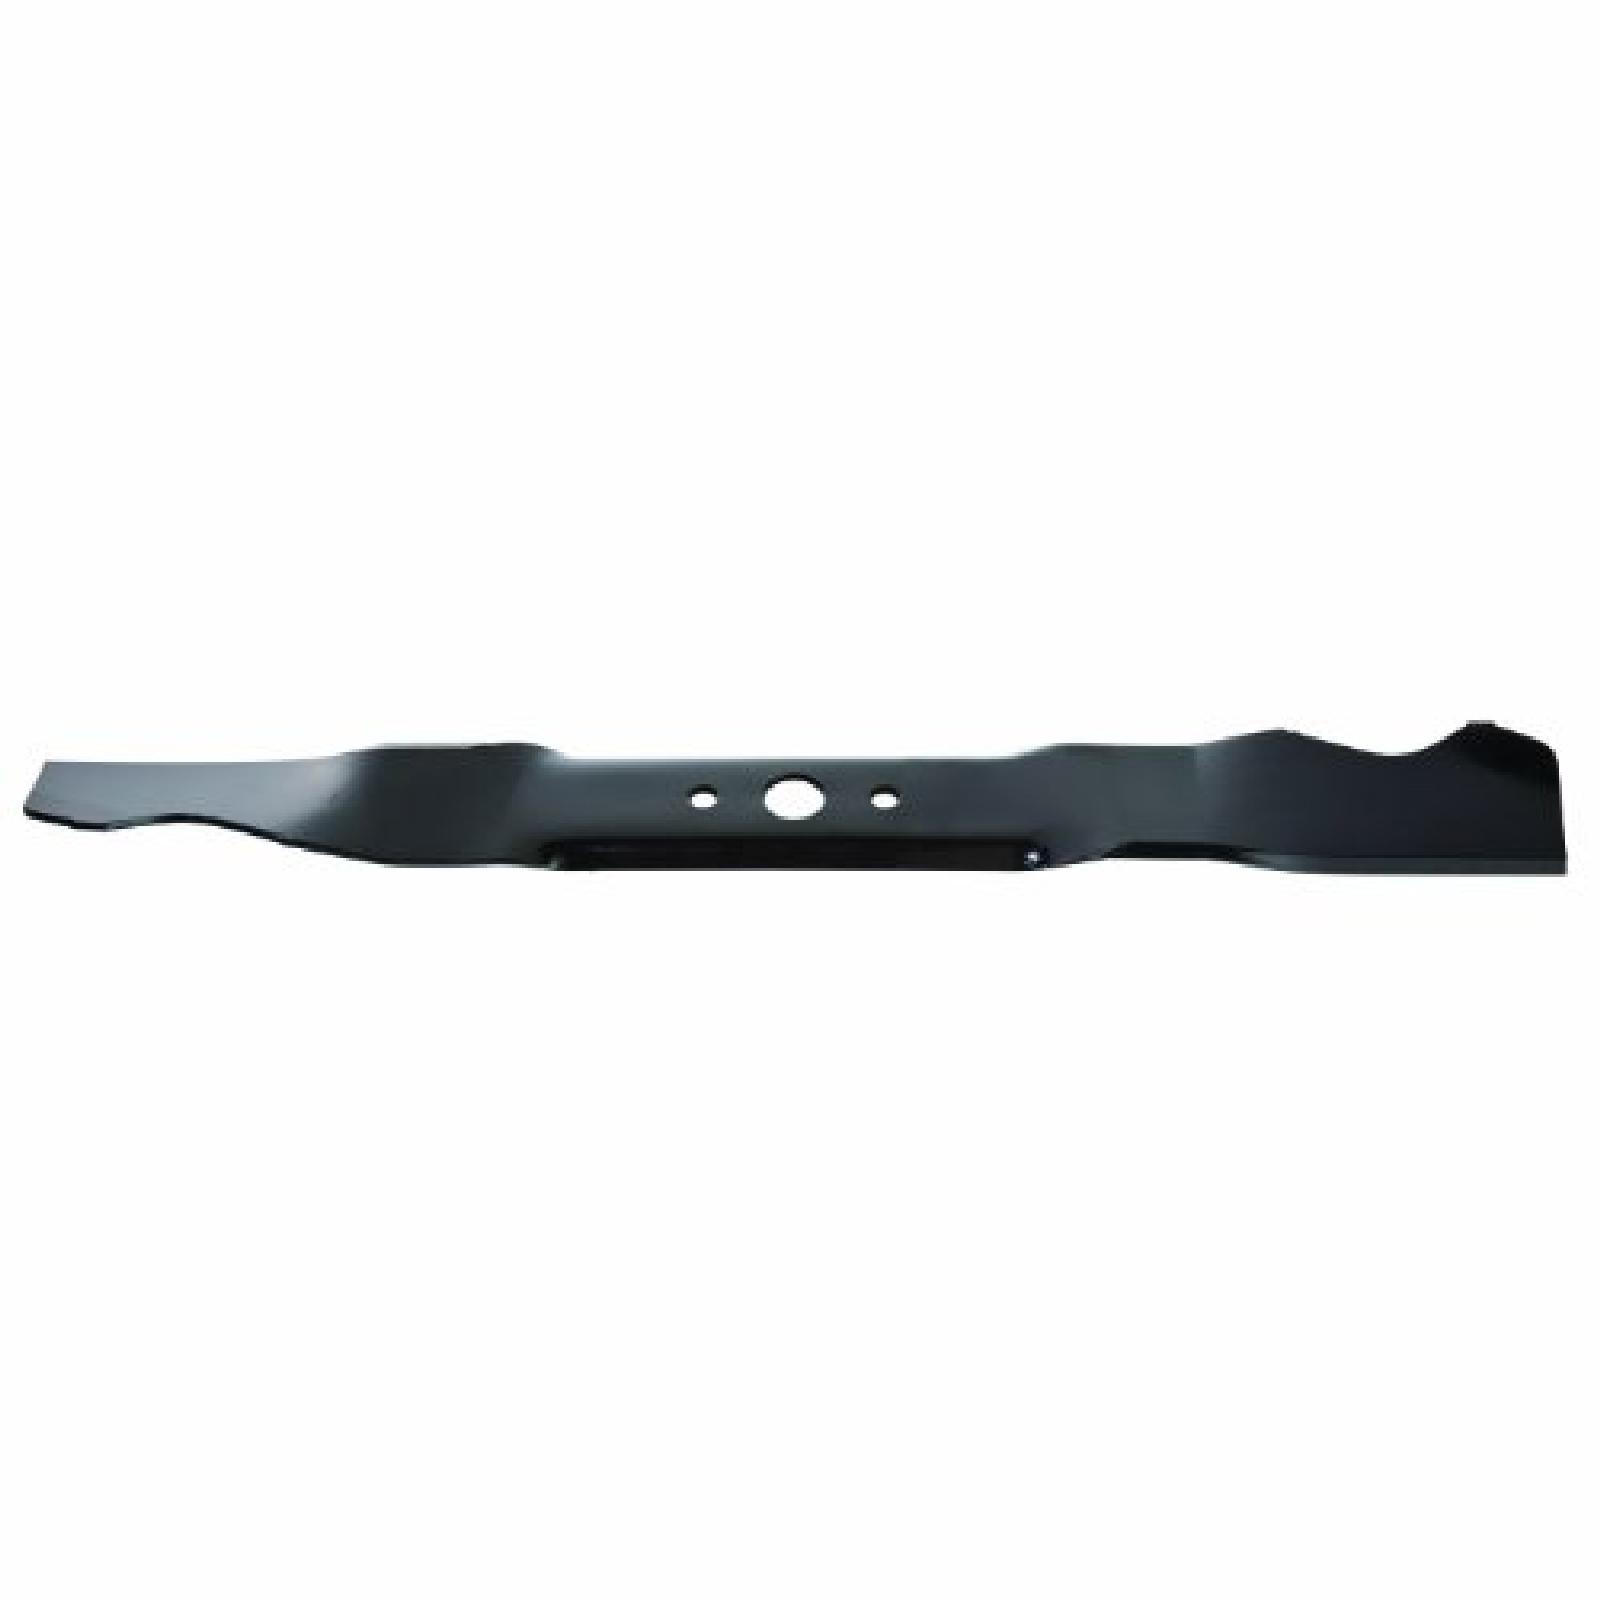 BLADE, MTD 942 0721, 20 1 part# 98007 by Oregon - Click Image to Close